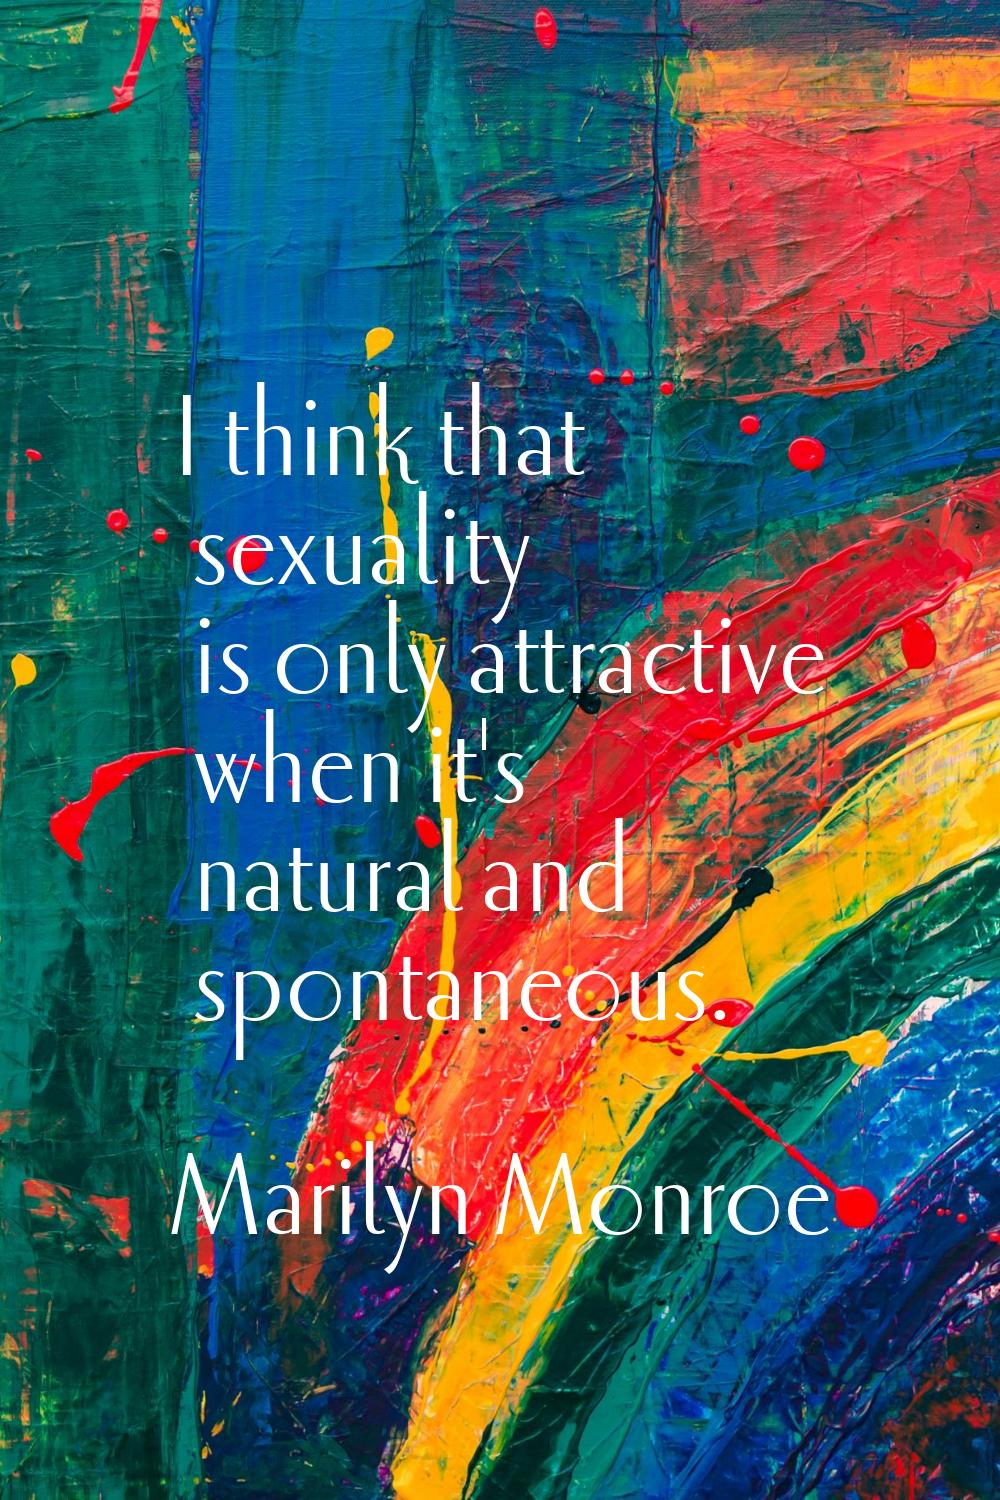 I think that sexuality is only attractive when it's natural and spontaneous.